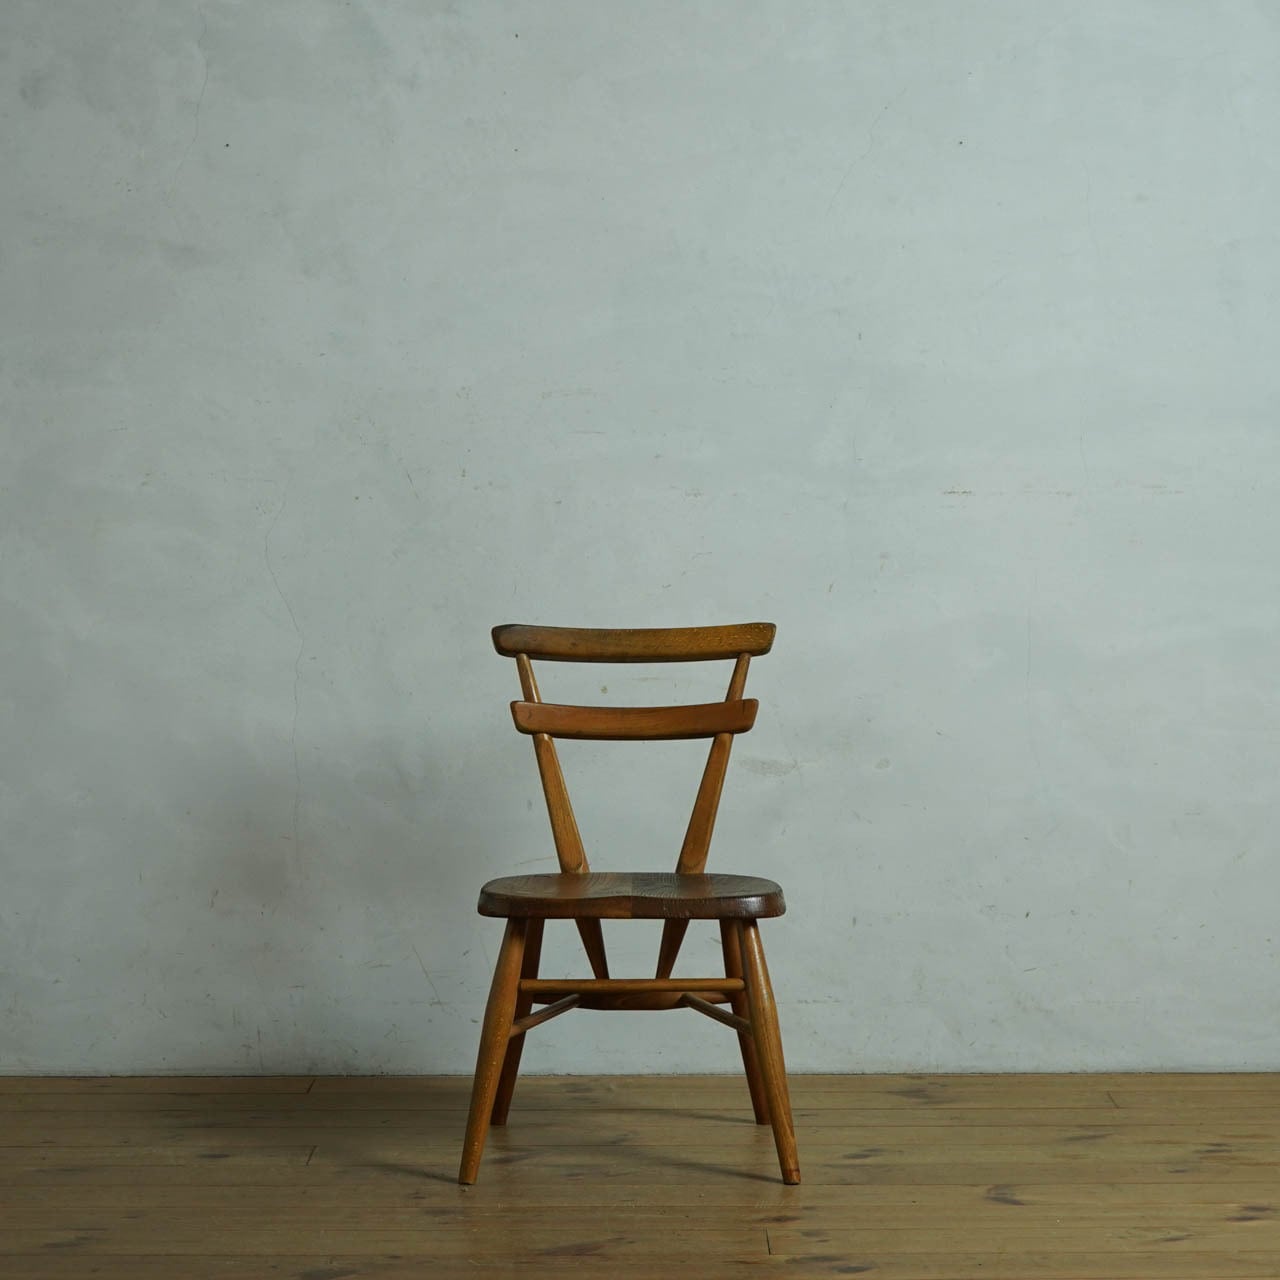 Ercol Stacking School Chair / アーコール スタッキングスクール チェア 【A】〈椅子・スクールチェア・キッズチェア・ アンティーク・ヴィンテージ・店舗什器〉112573 | SHABBY'S MARKETPLACE アンティーク・ヴィンテージ 家具や雑貨のお店